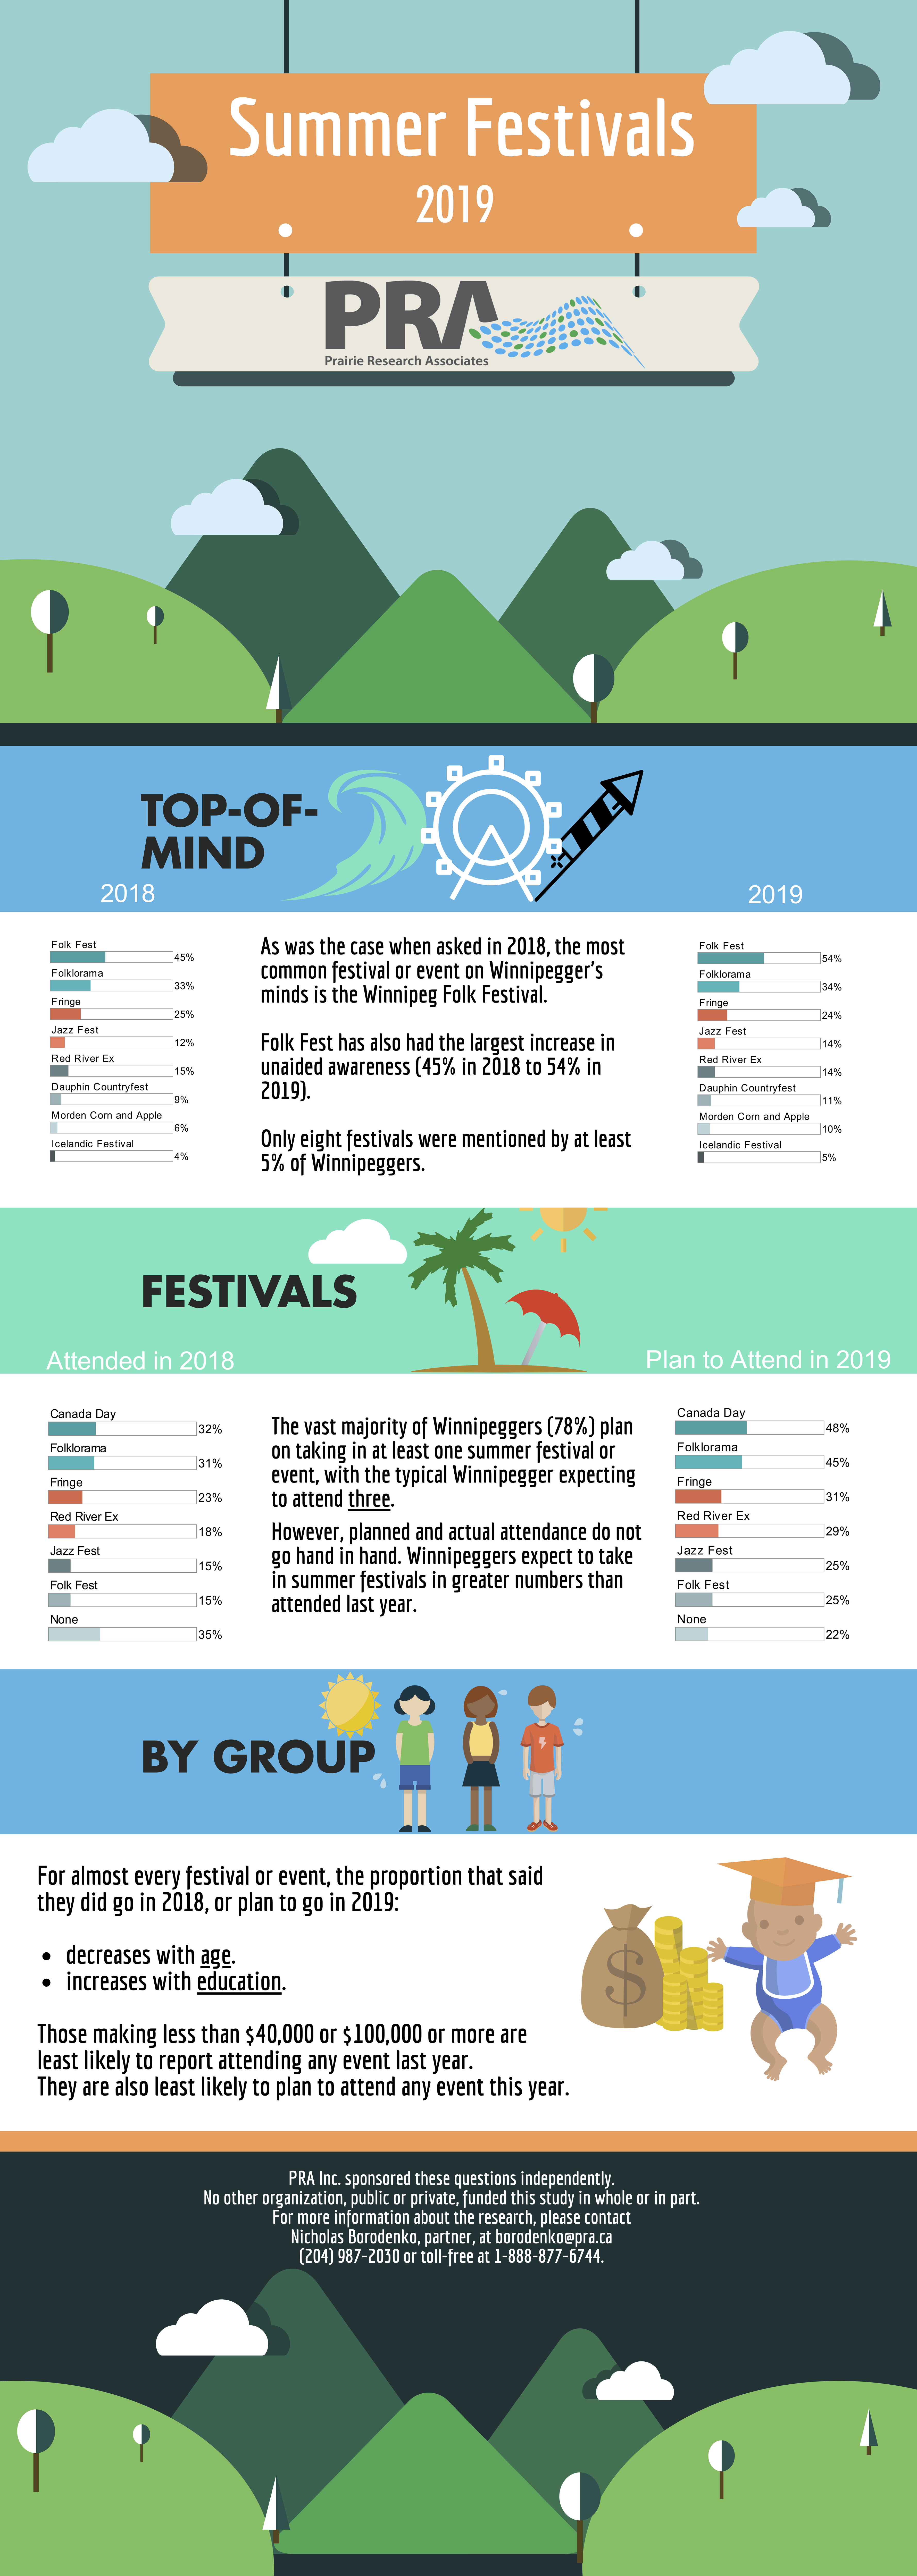 An infographic with stats on summer festivals in Manitoba.